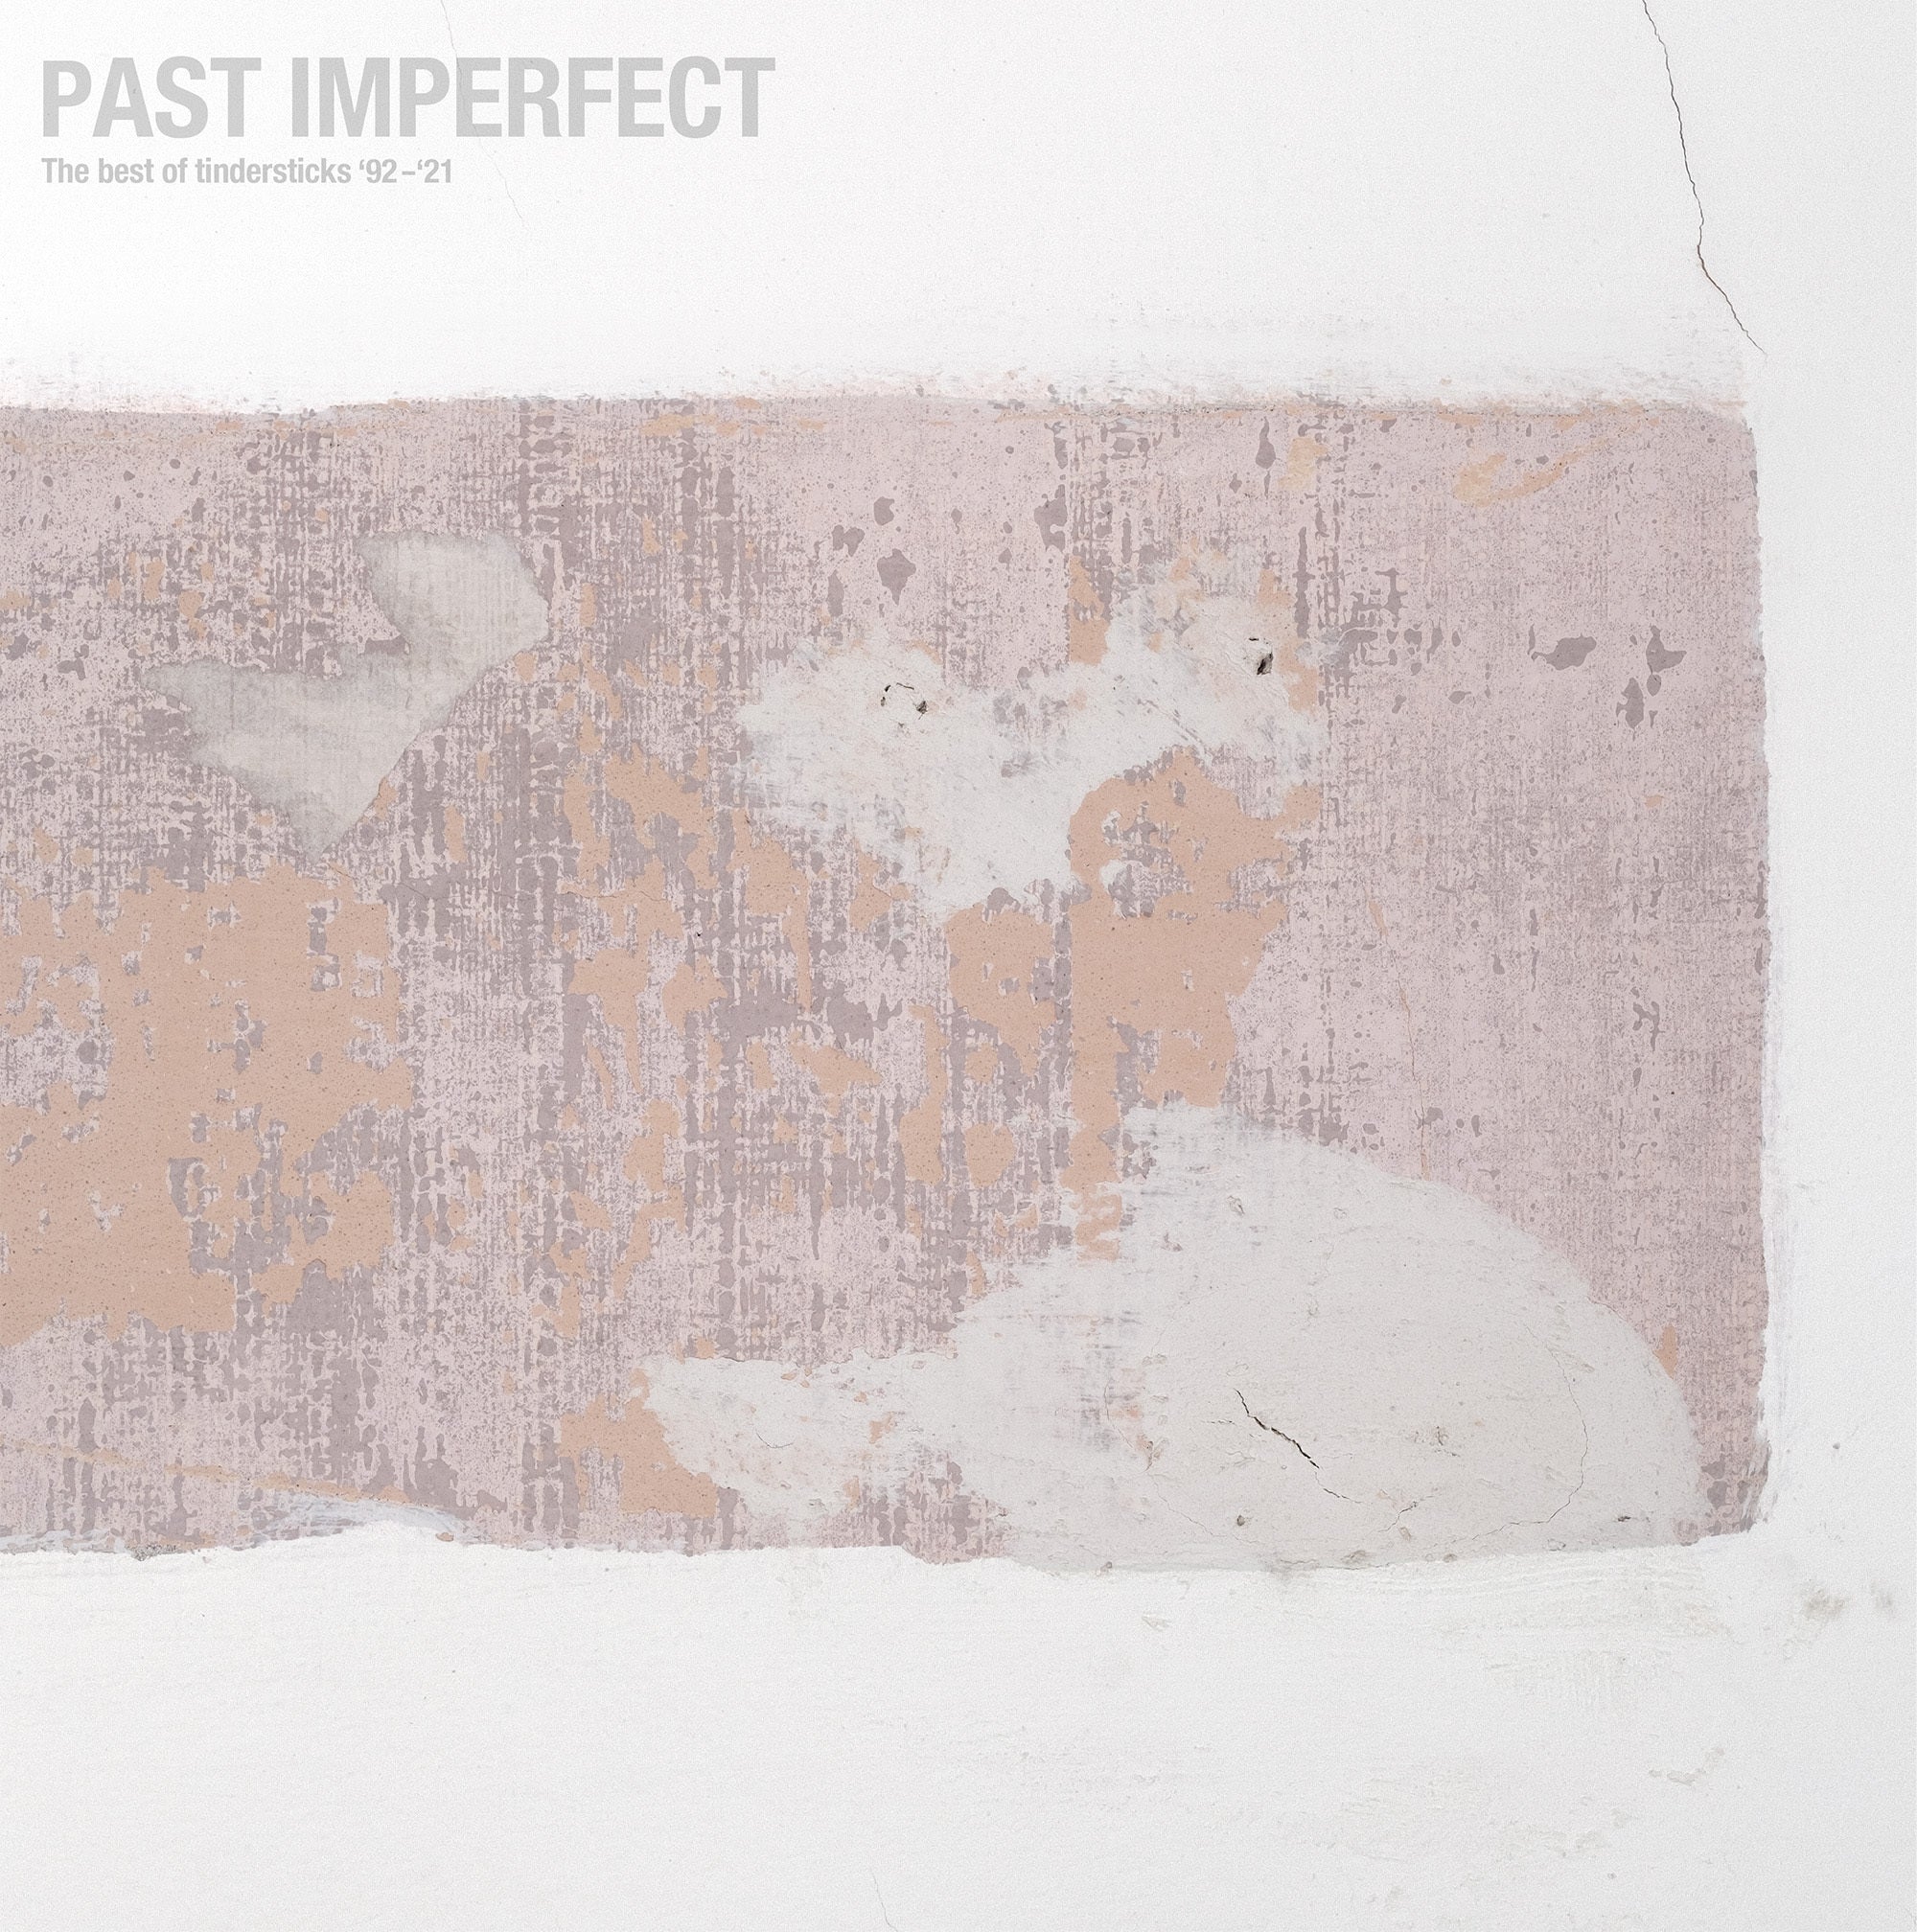 Past Imperfect - the best of tindersticks '92 - '21